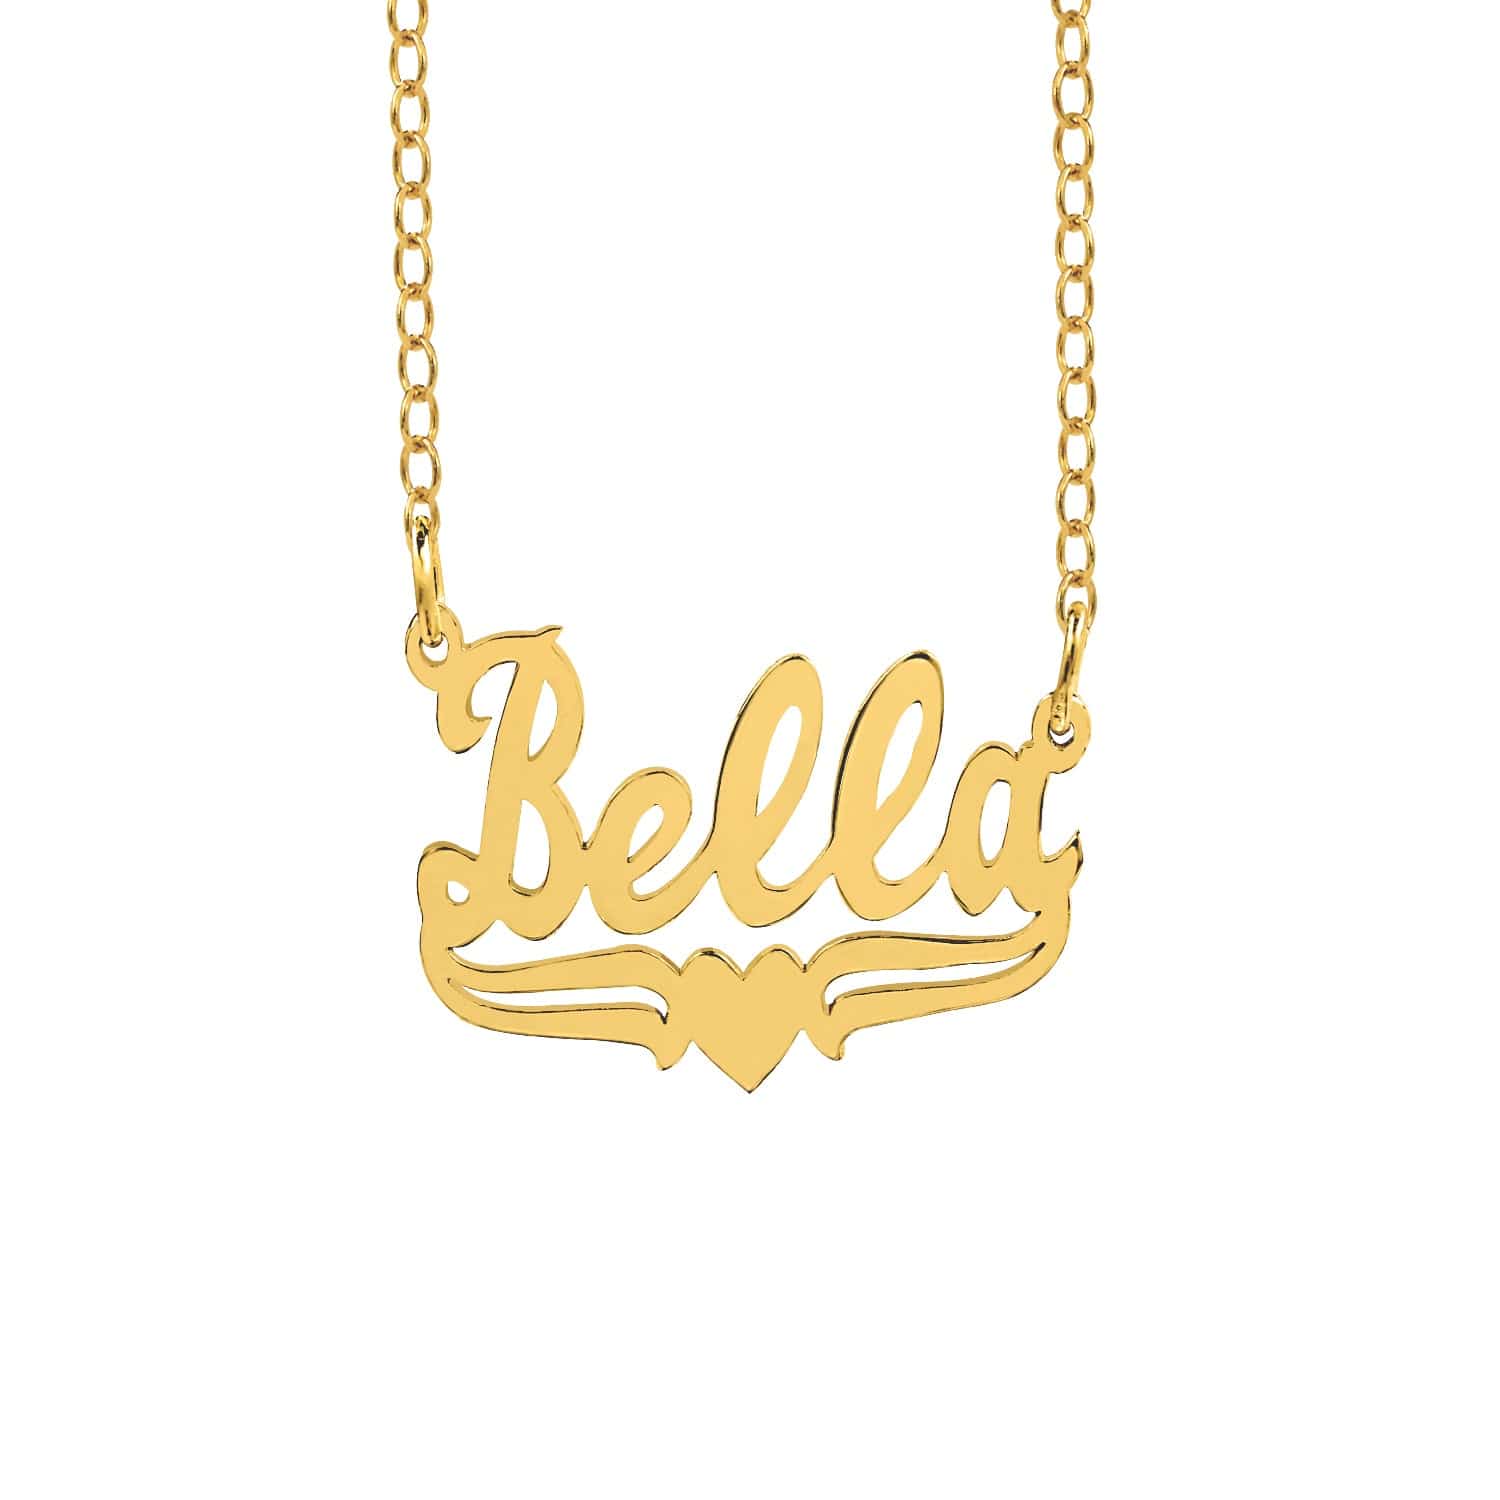 The Bella Name Necklace with Heart